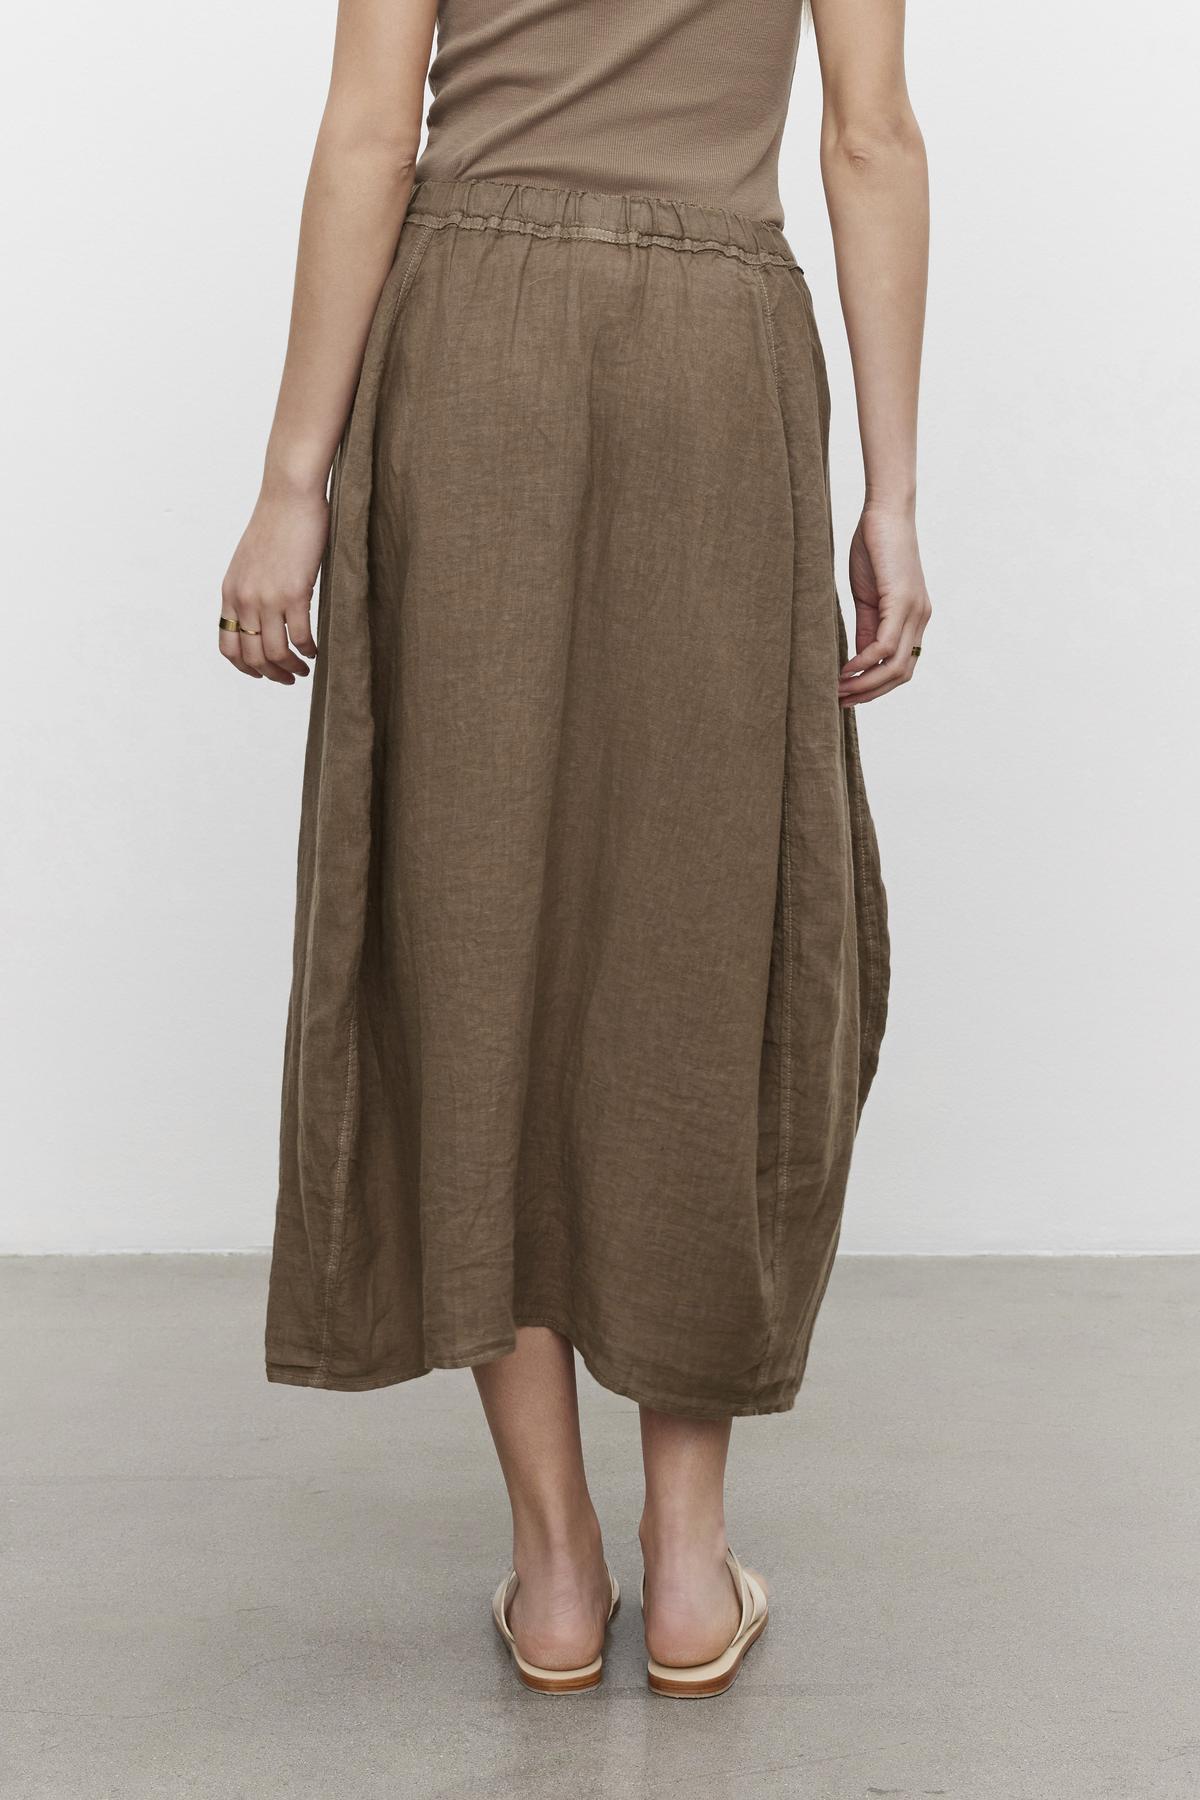 Woman standing in a brown mid-length FAE LINEN A-LINE SKIRT with an elastic waistband and beige shoes against a grey background by Velvet by Graham & Spencer.-36443407155393